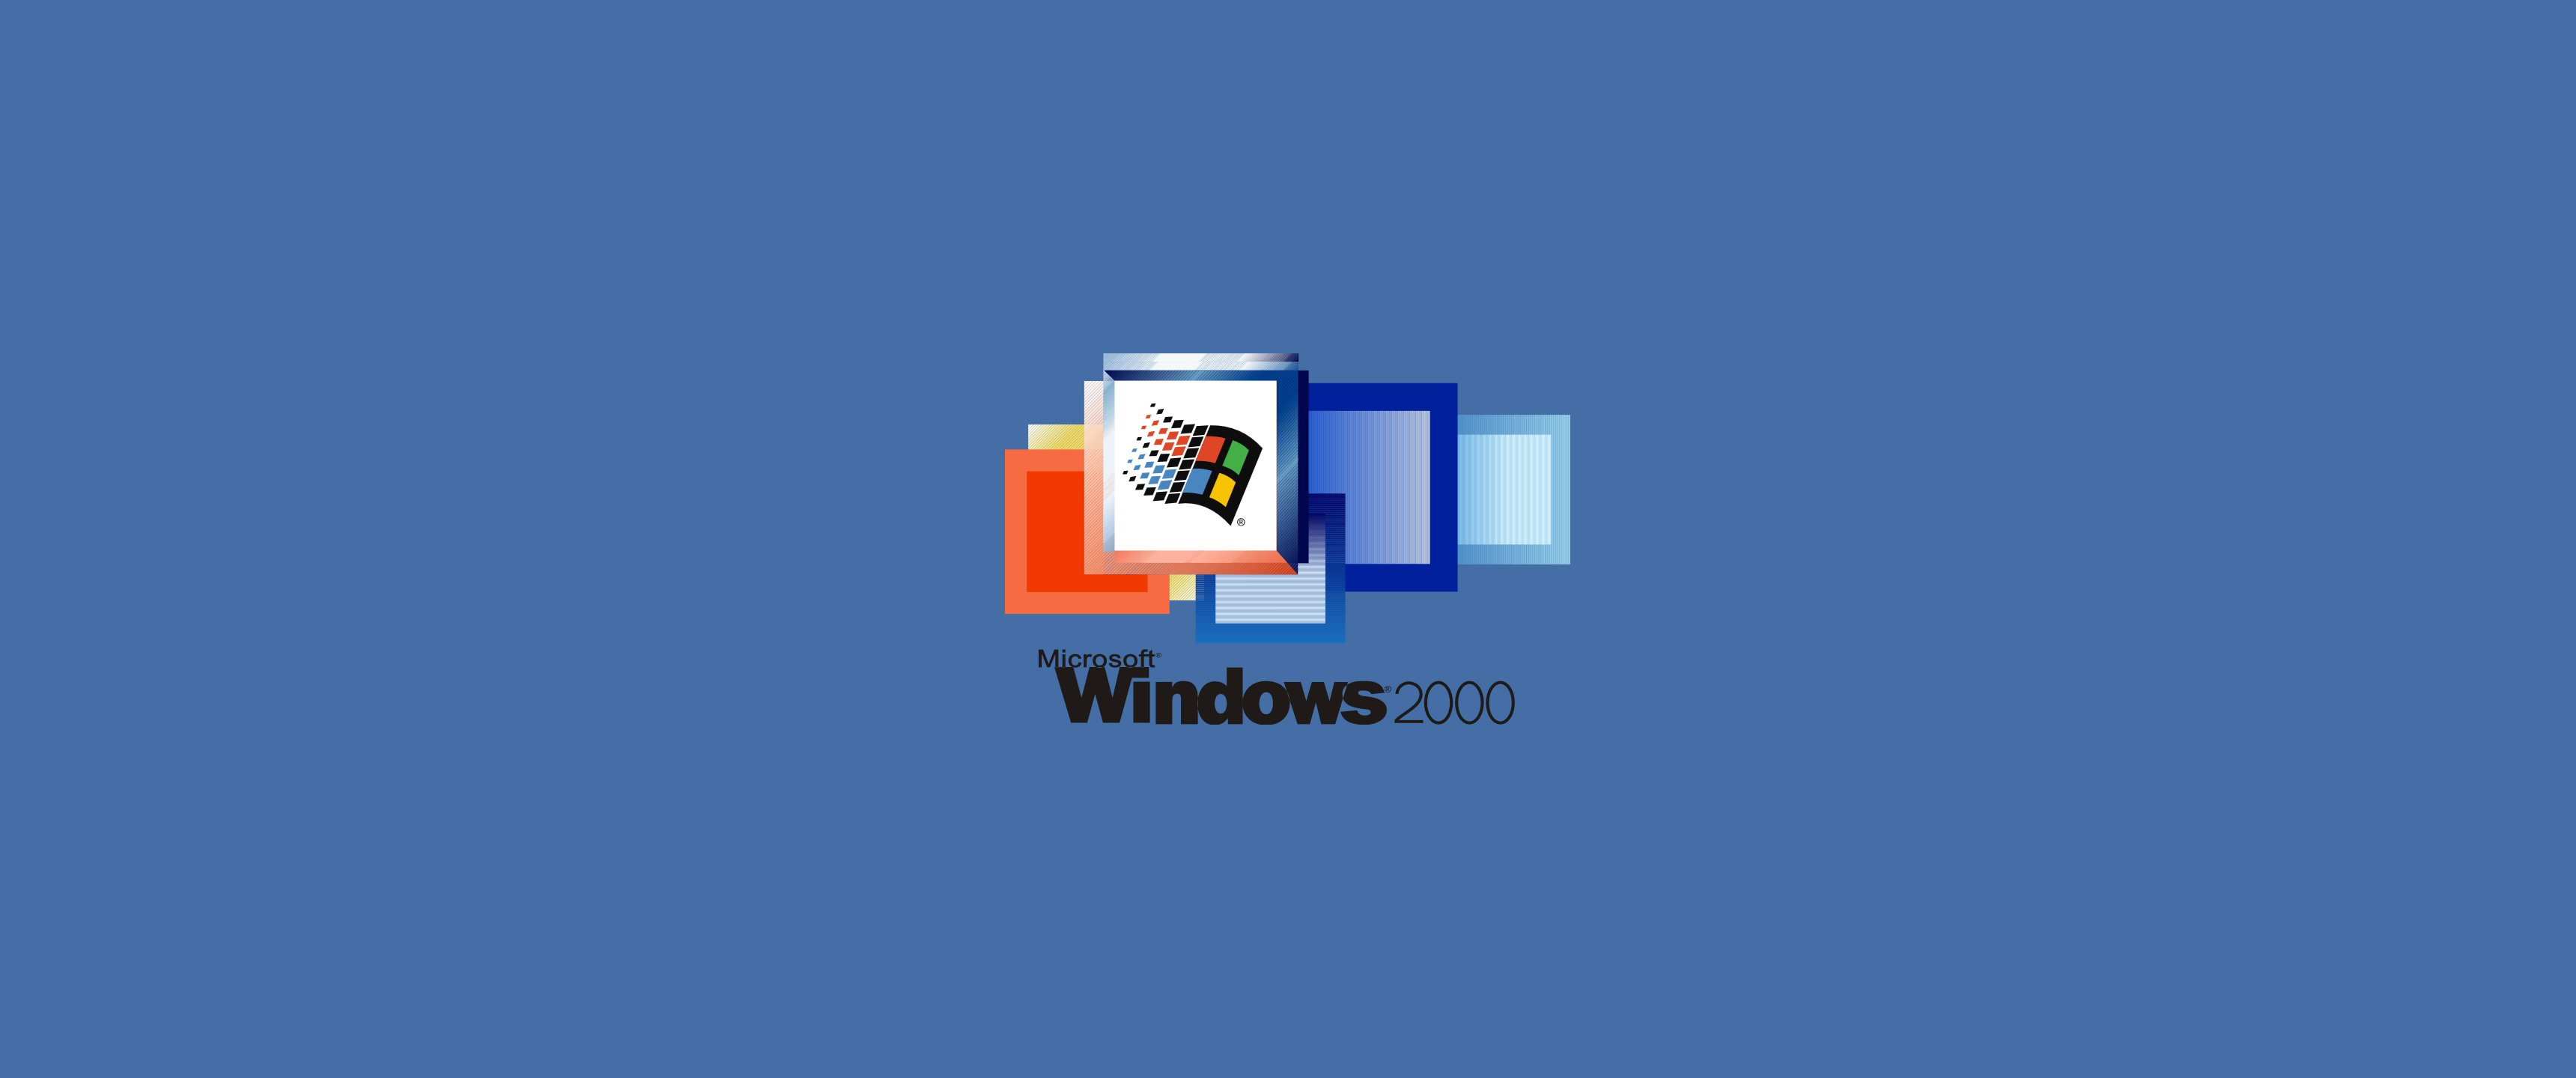 Windows 00 Hd Computer 4k Wallpapers Images Backgrounds Photos And Pictures